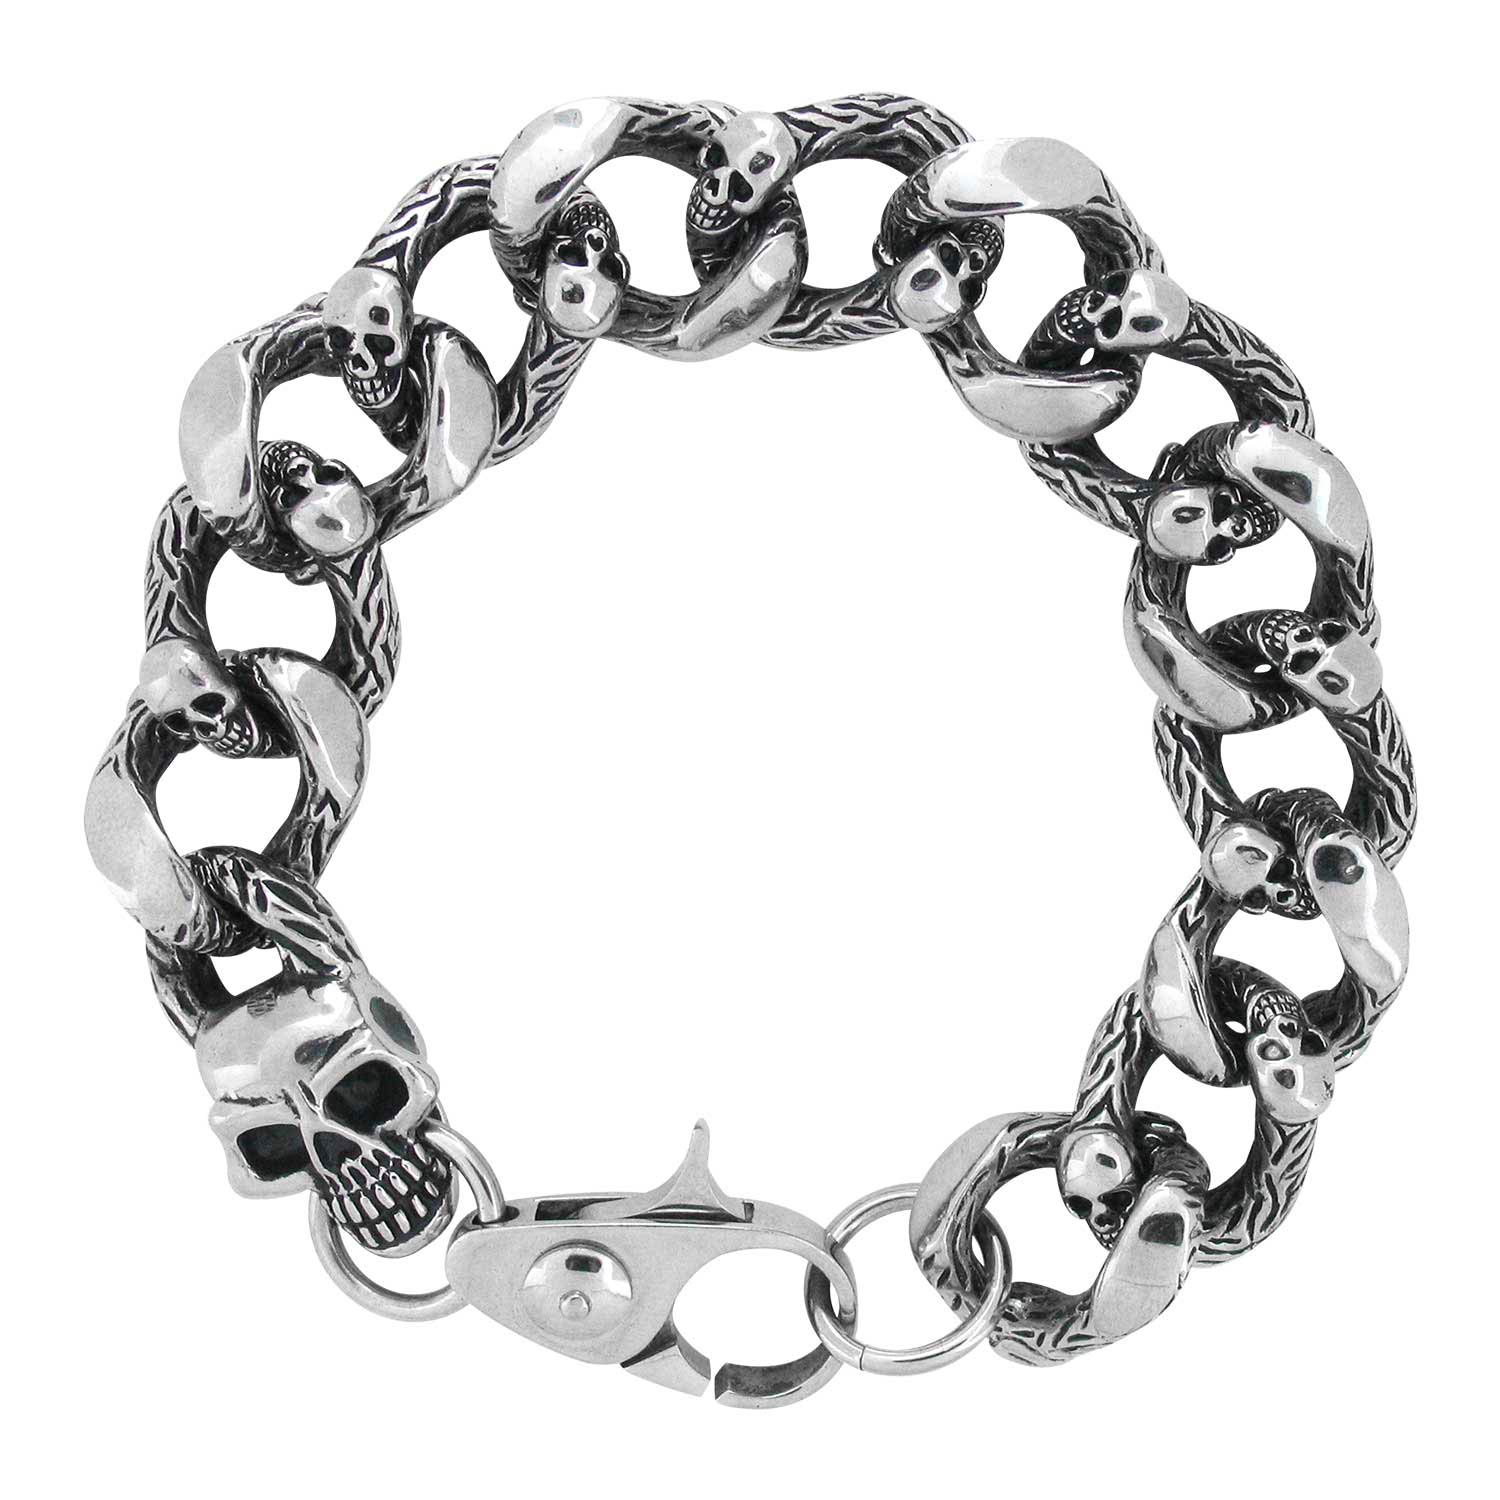 Heavy Duty Curb Chain Bracelet with Casted Skulls Lewis Jewelers, Inc. Ansonia, CT